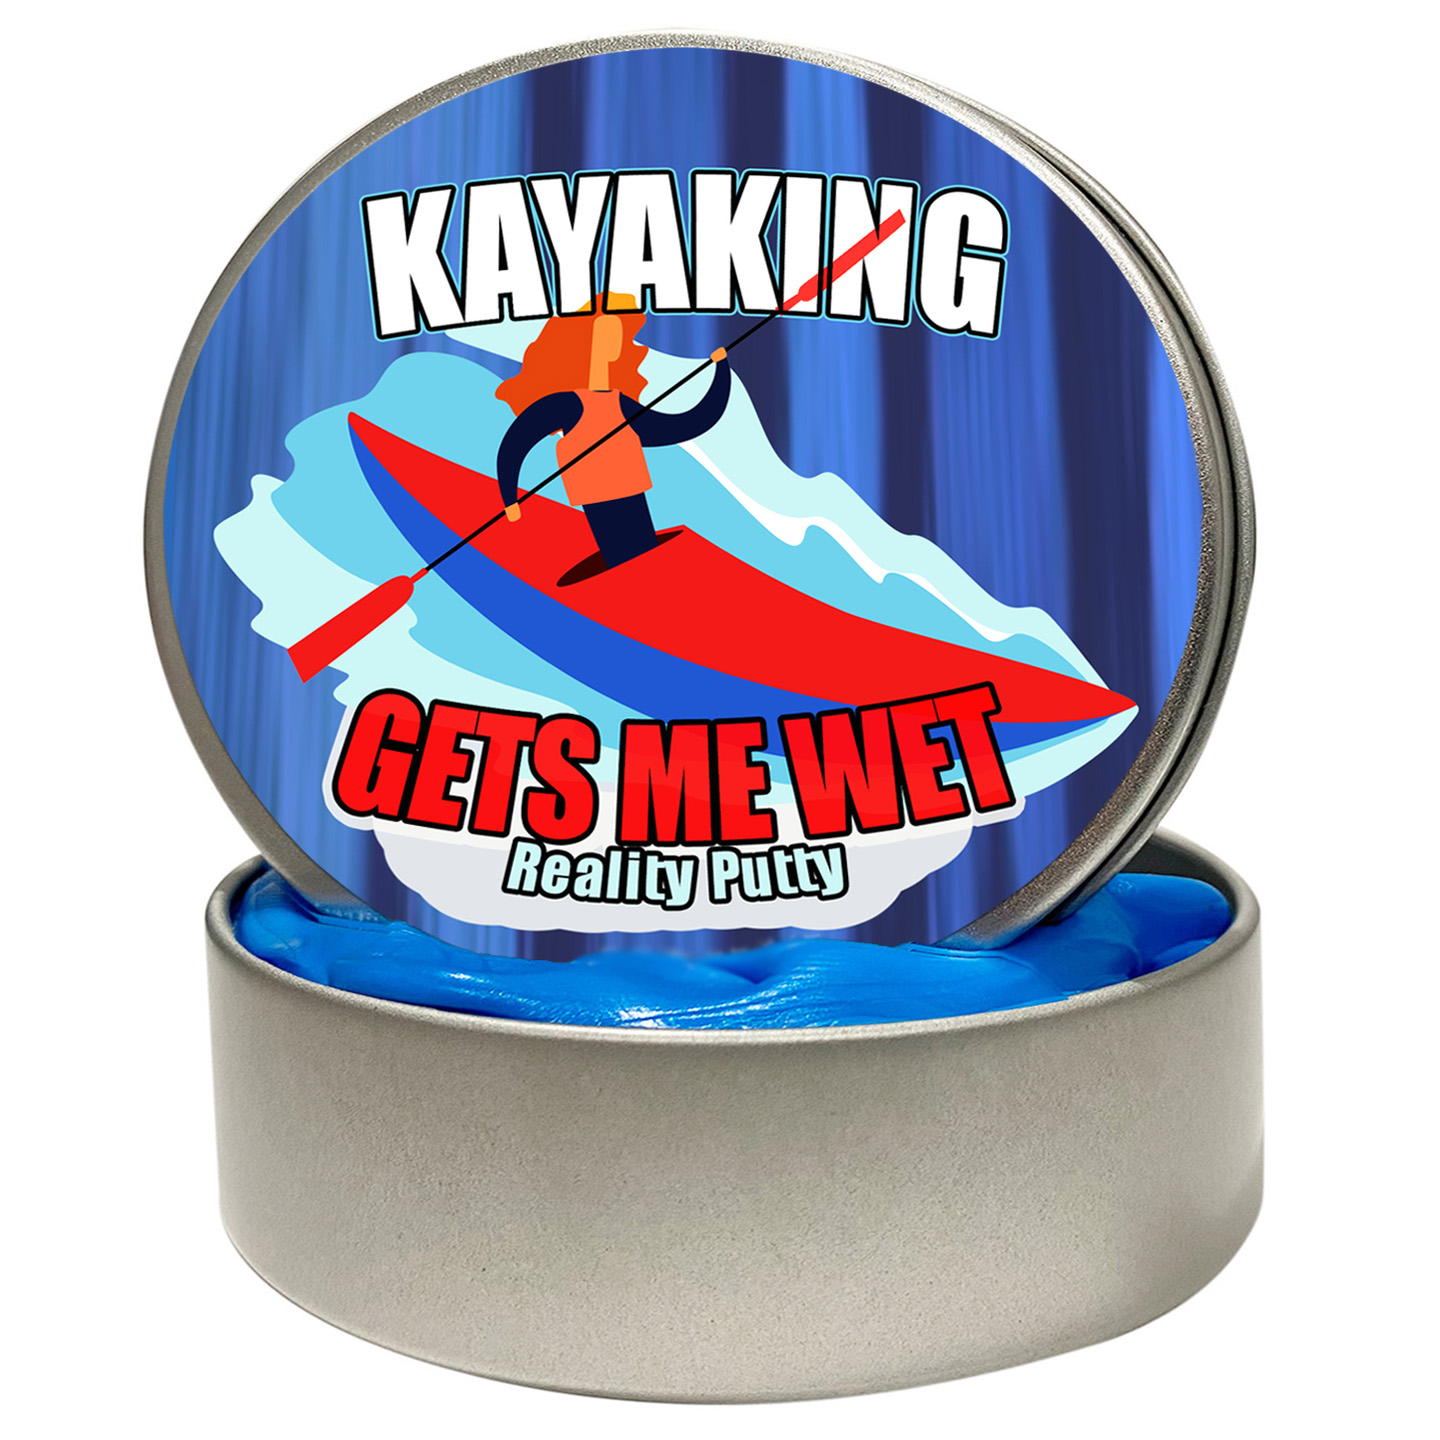 Kayaking Gets Me Wet Stress Putty 6 99 Unique Ts And Fun Products By Funslurp